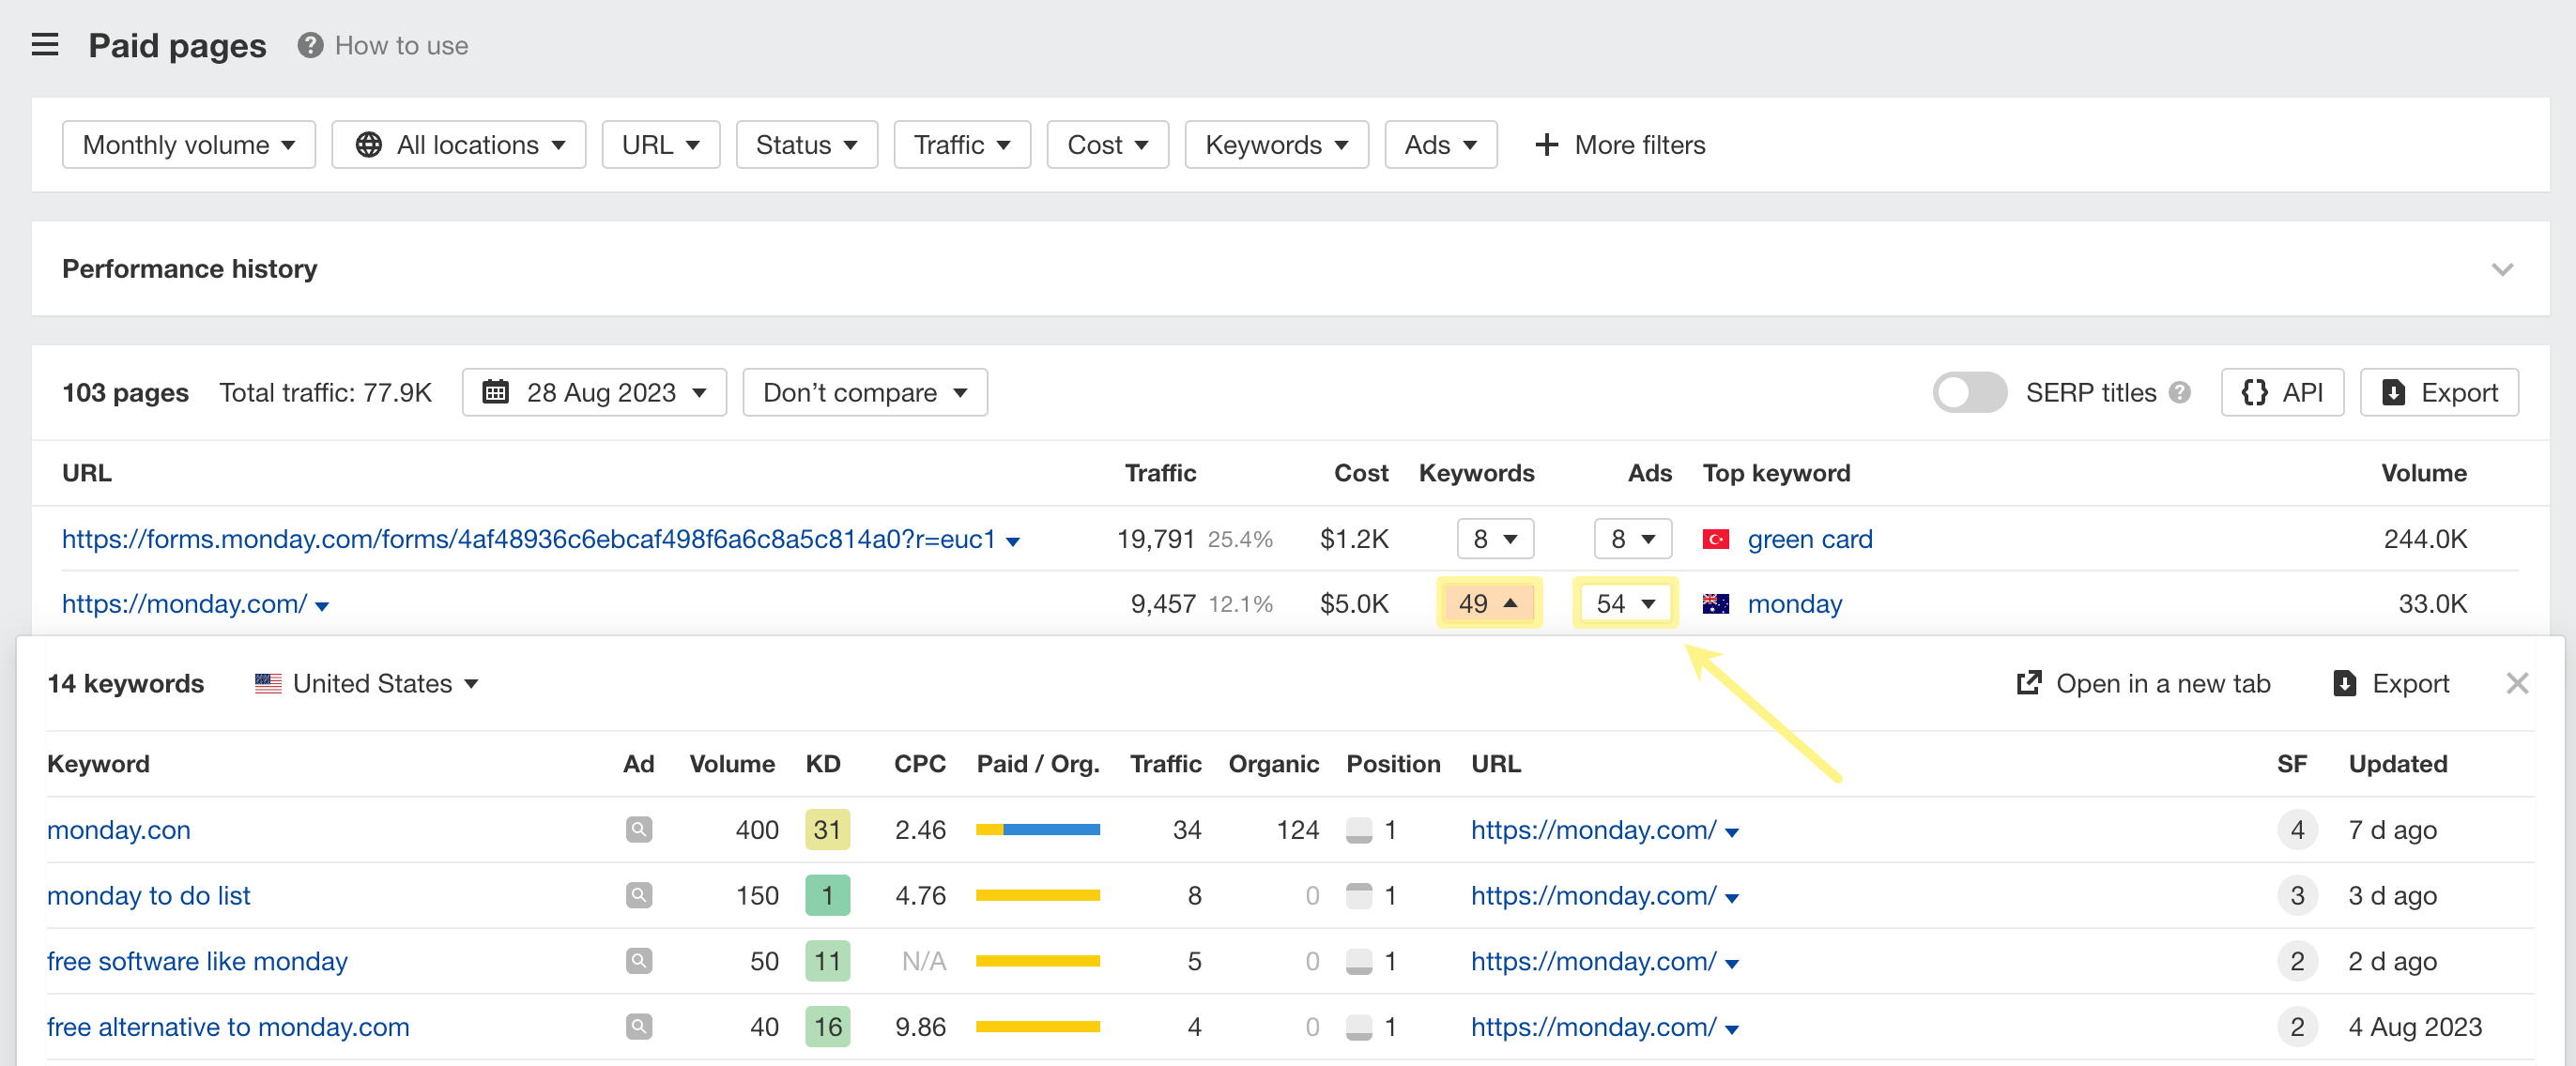 Nested tables in Ahrefs' Paid pages